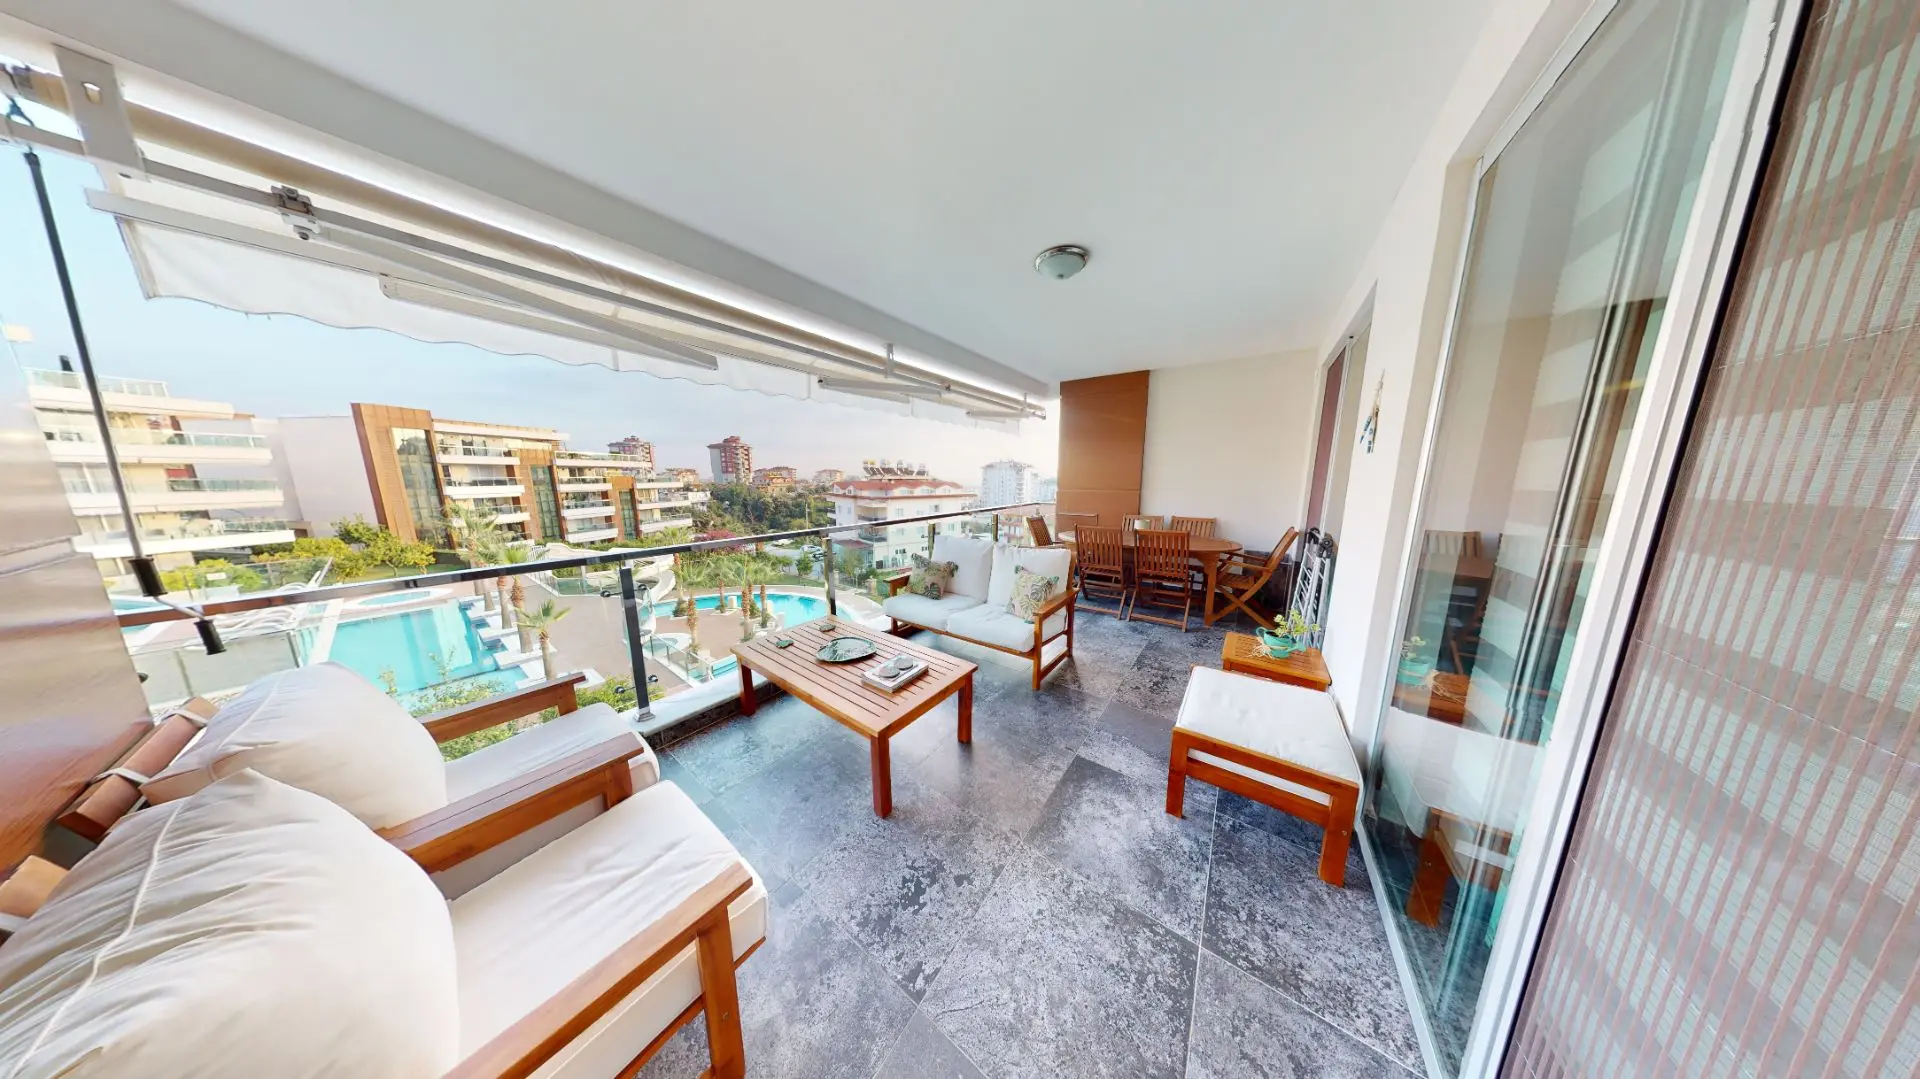 FURNISHED 2+1 FLAT WITH A BEAUTIFUL VIEW FROM BALCONY IN ALANYA